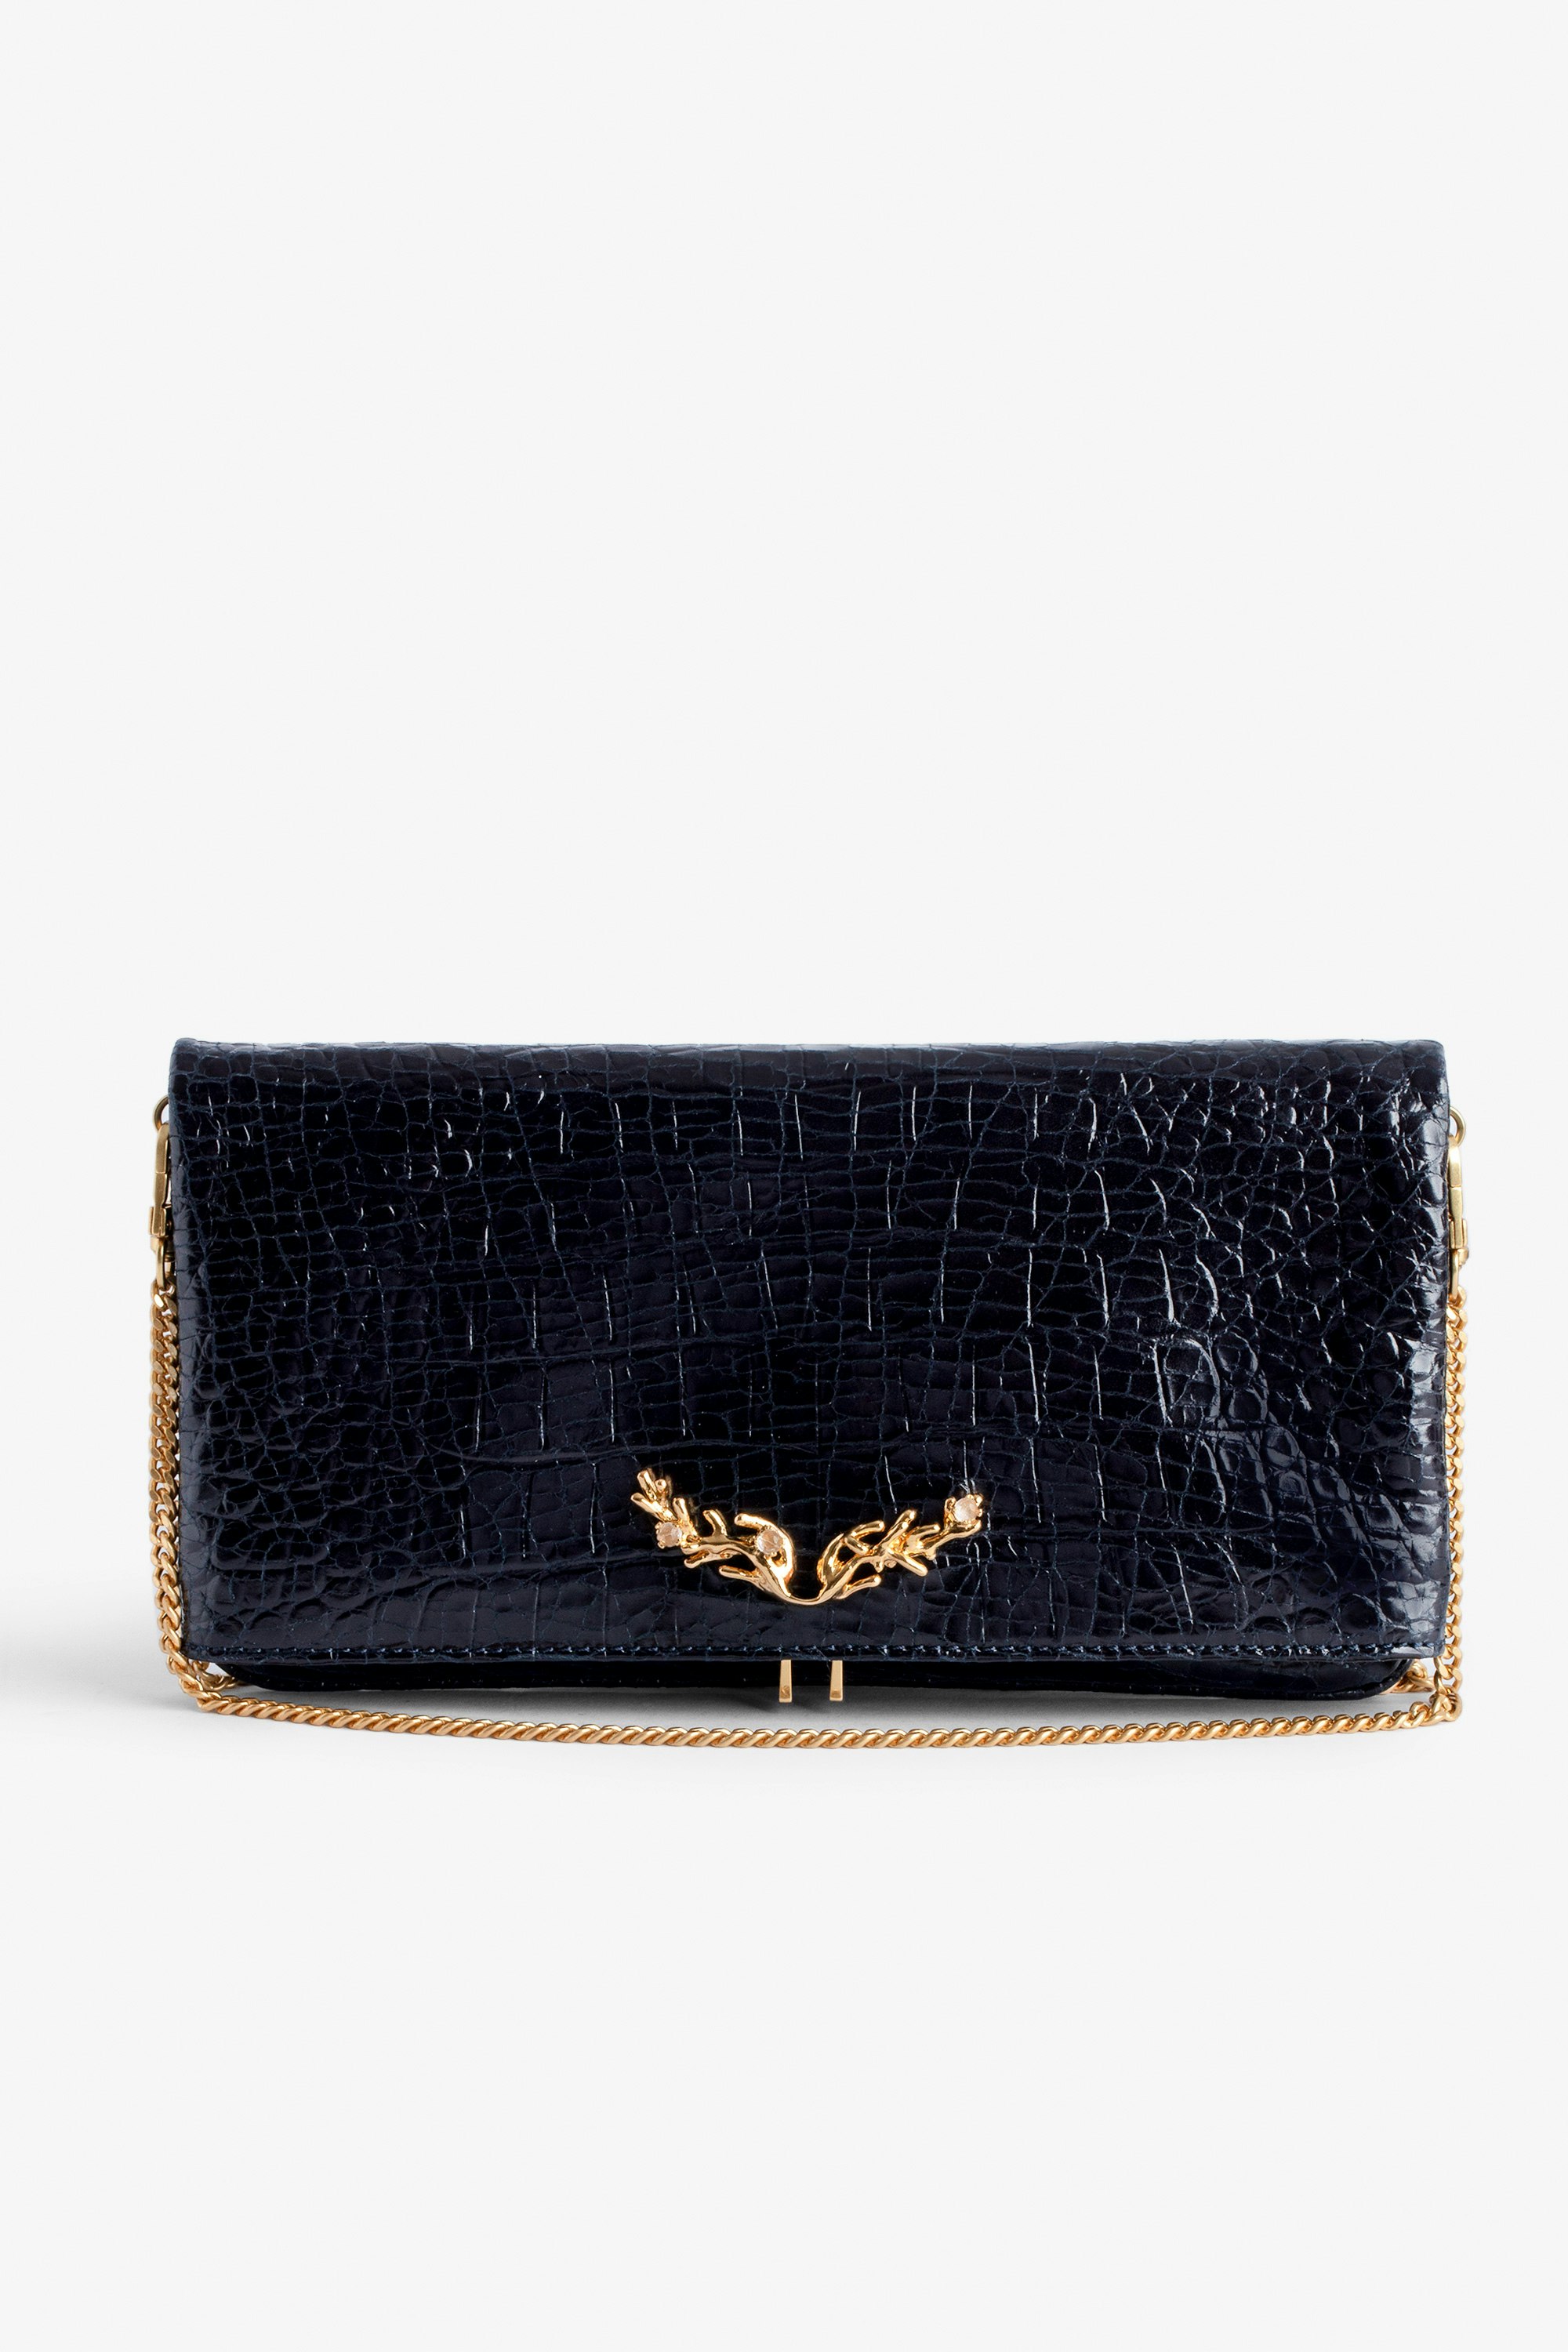  Goossens Rock Embossed Clutch - Rock navy blue croc-embossed leather clutch with gold-tone metal chain.